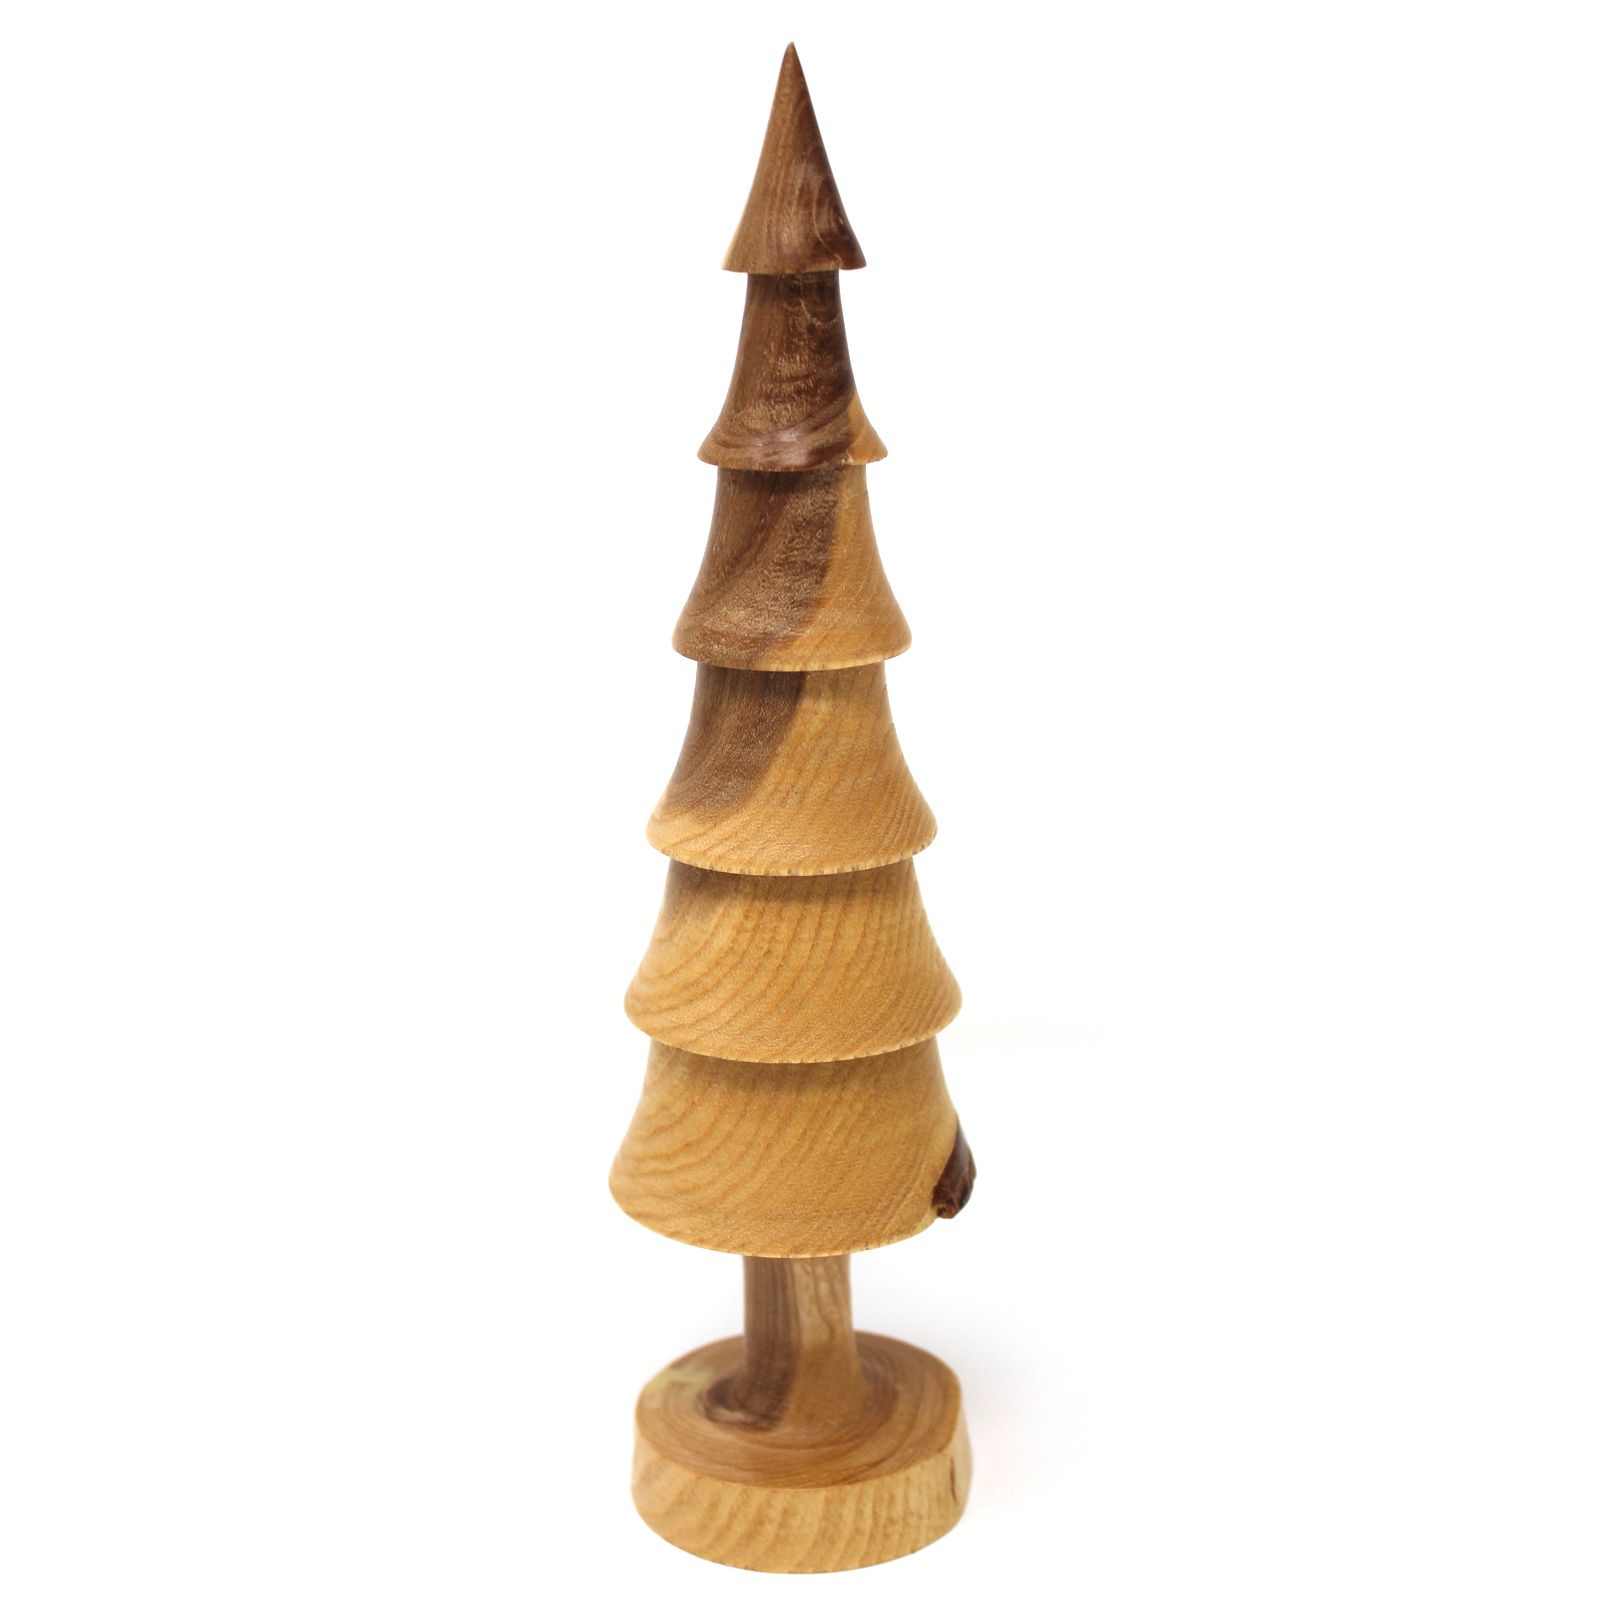 Wooden Christmas Tree Ornament Nordic Style - Yew Wood